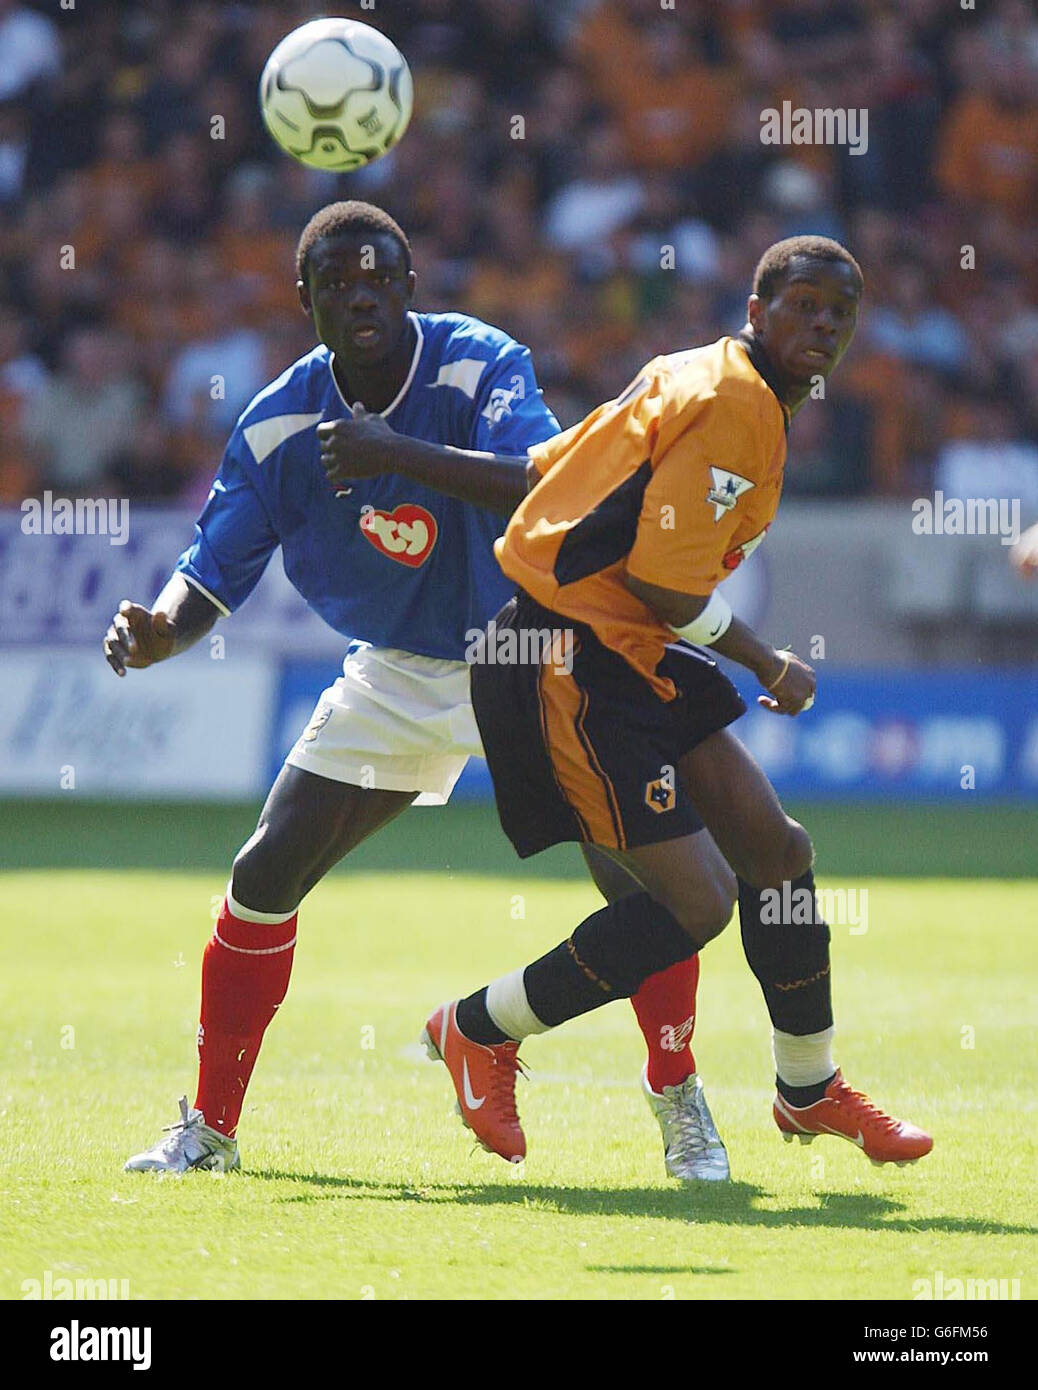 Portsmouth defender Amdy Faye battles with Wolverhampton Wanderers Henri Camara (R), during their FA Premiership match at Wolves' Molineux ground. Stock Photo